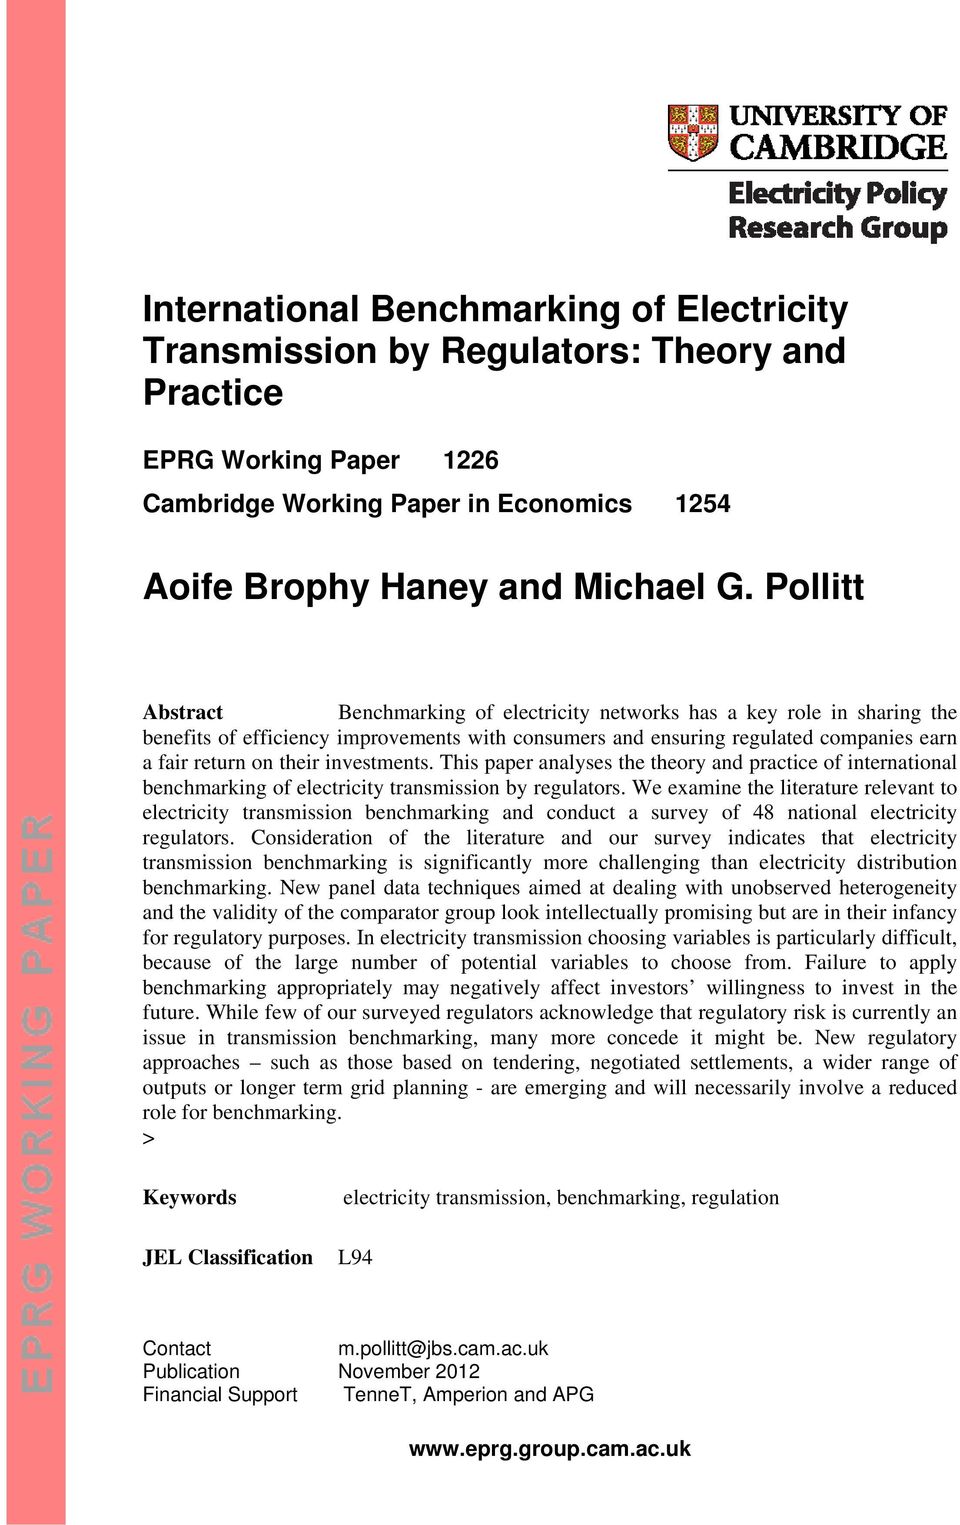 investments. This paper analyses the theory and practice of international benchmarking of electricity transmission by regulators.